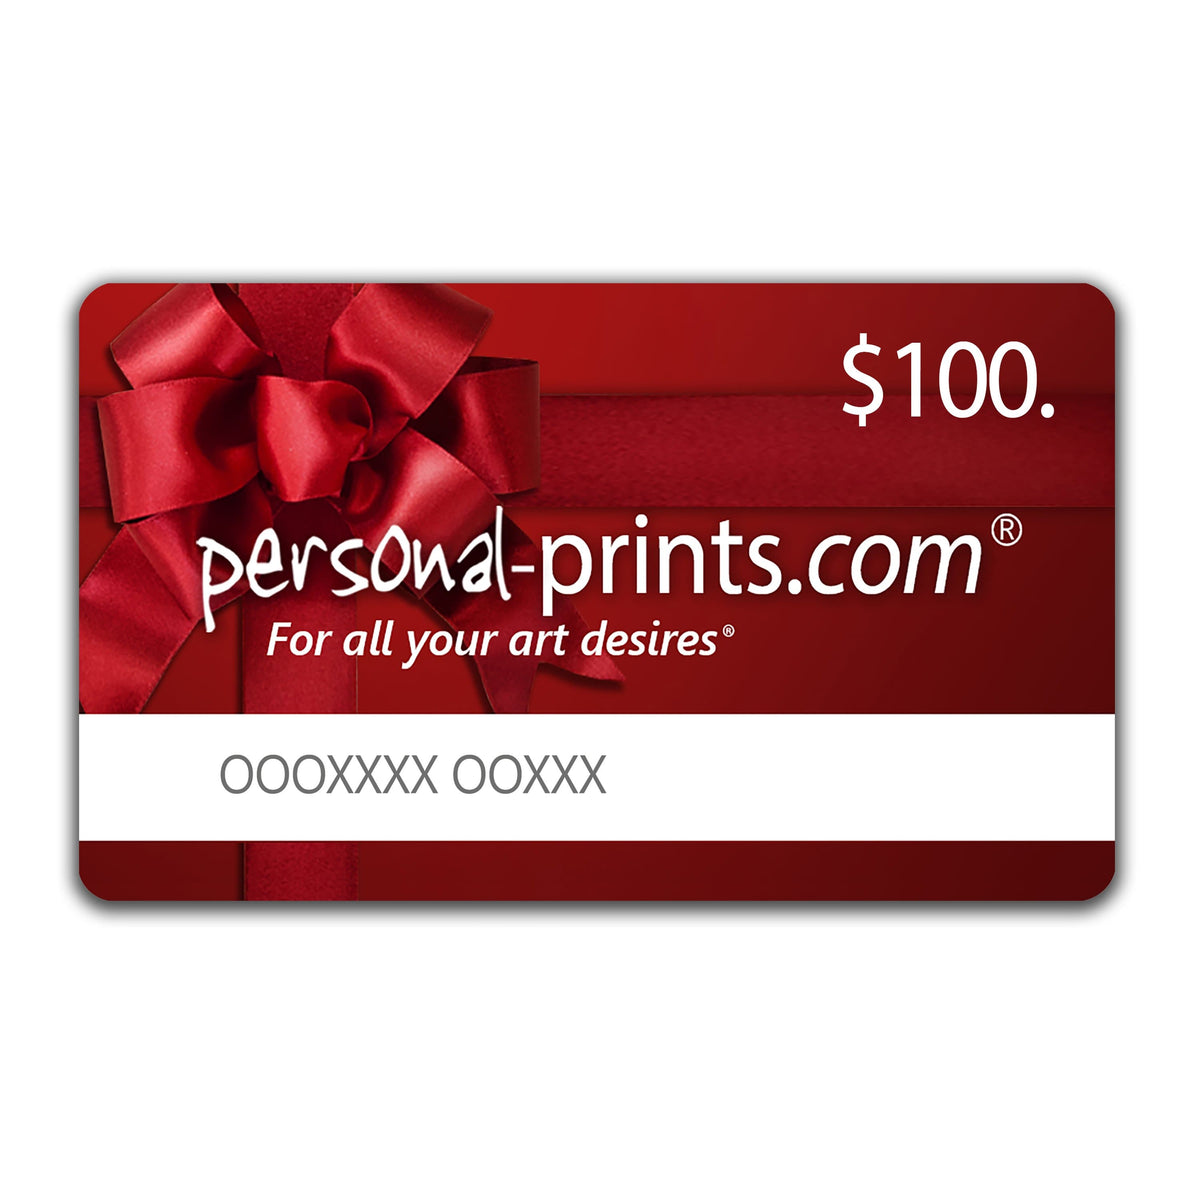 Ecard gift certificate for a personalized gift from Personal-Prints.com